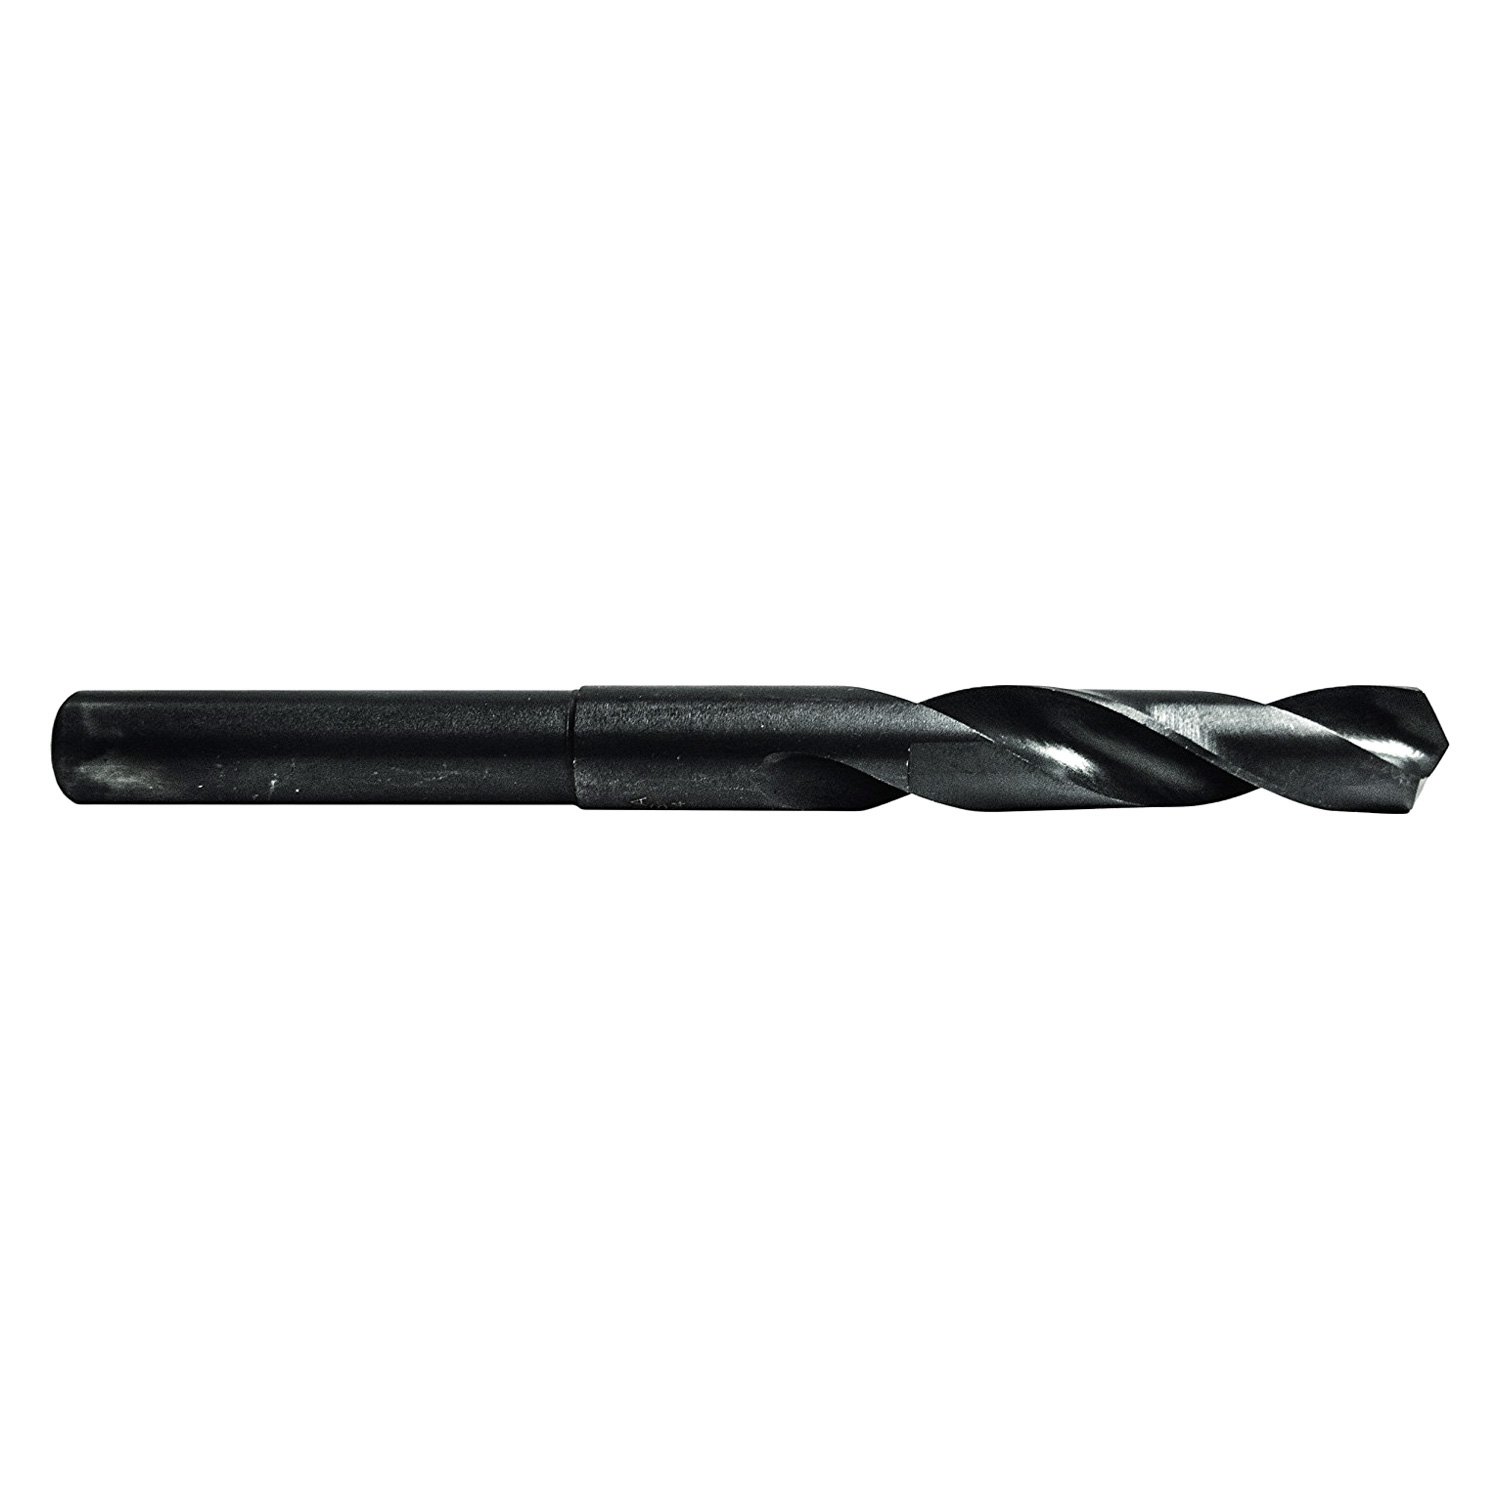 S and D Black Oxide Drill Bit 17//32 in